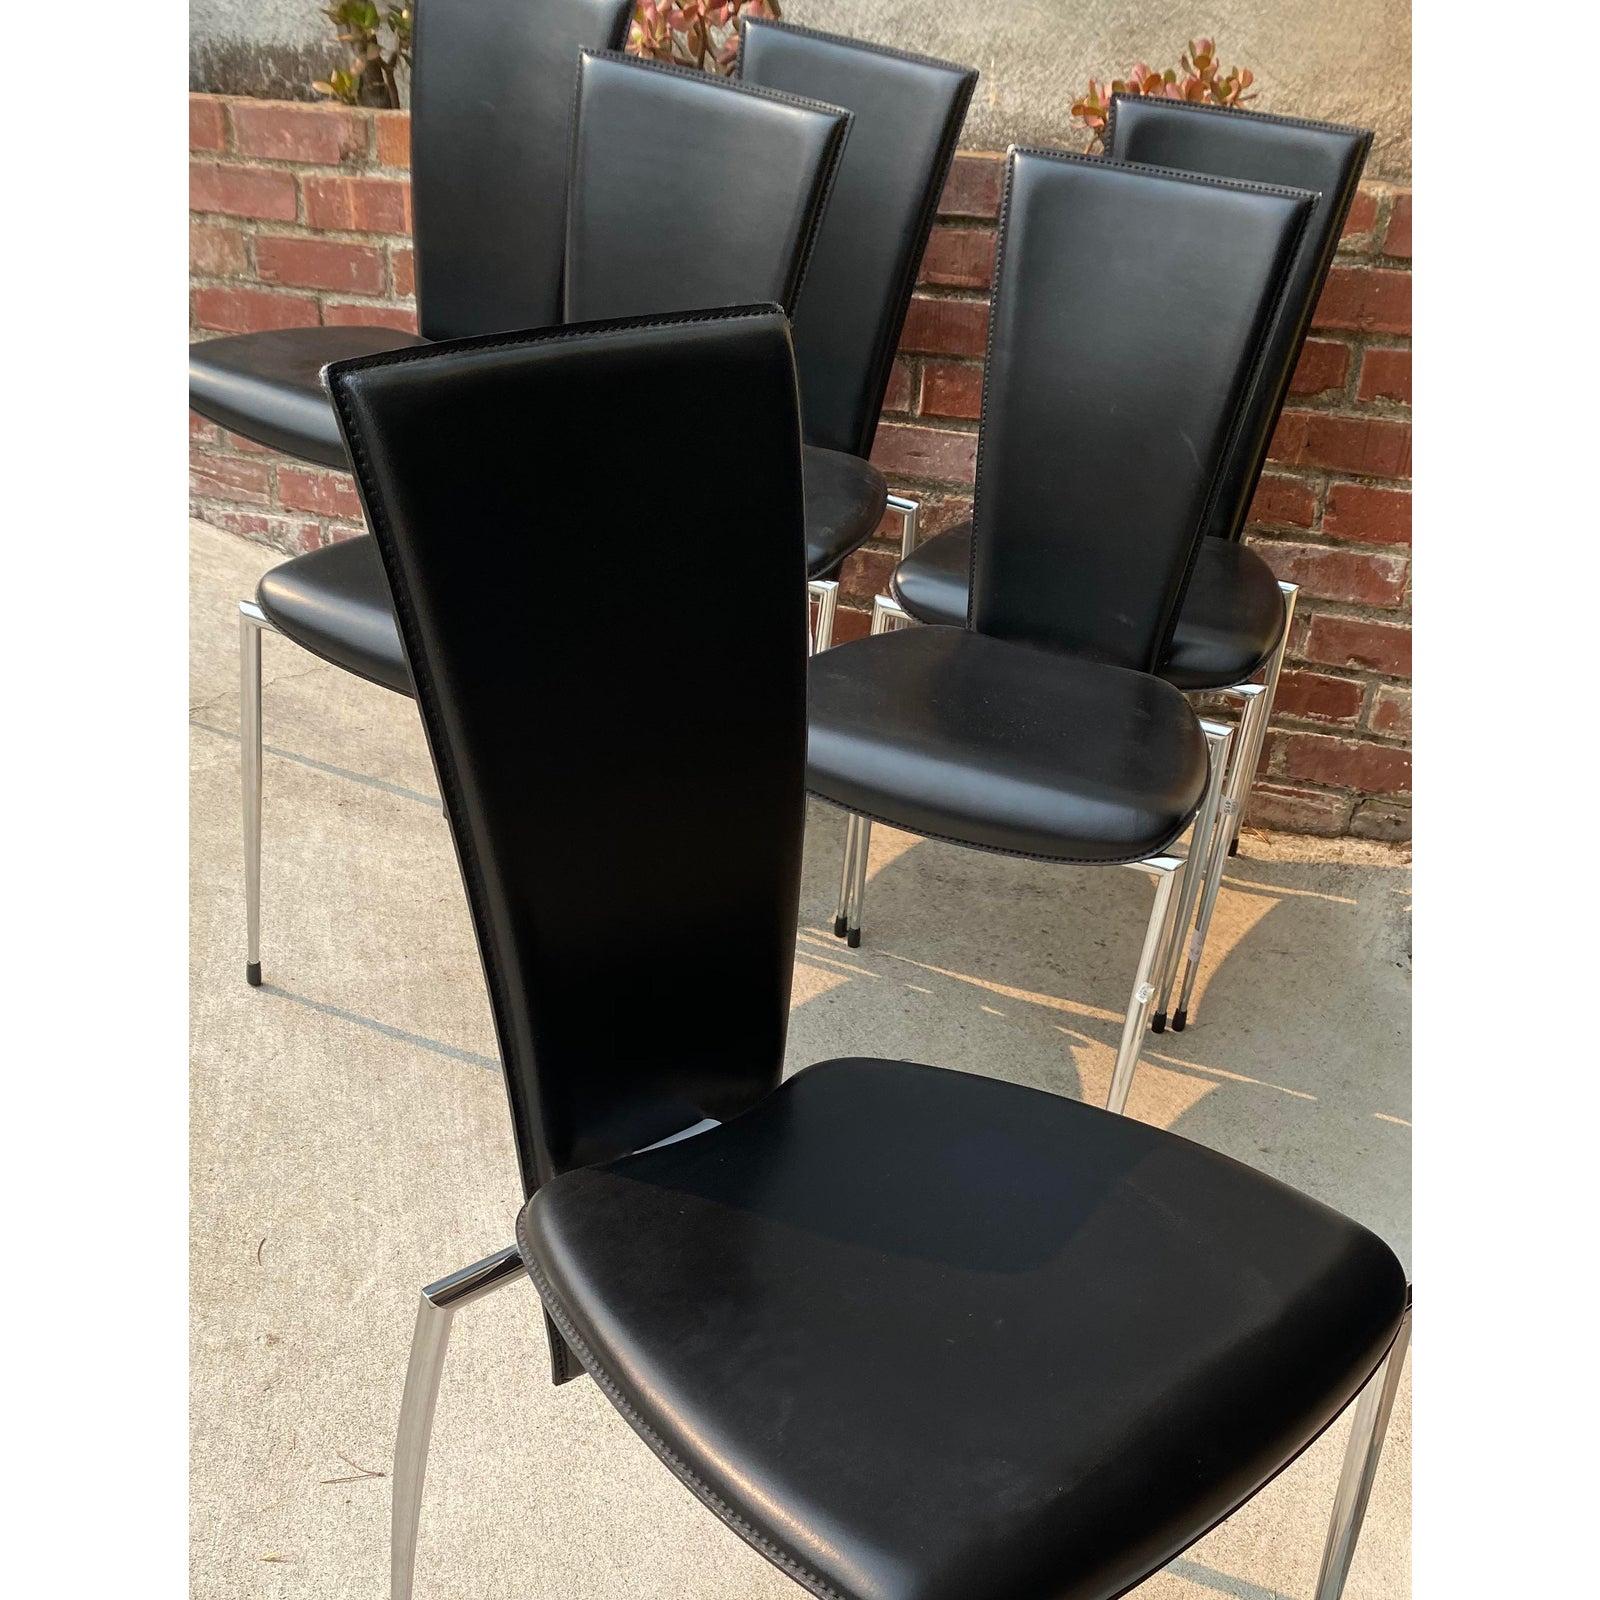 Six black leather and chrome Italian modern dining chairs by Arper

Quality built. Made in Italy. Gorgeous dining chairs.

Measures: 17.5